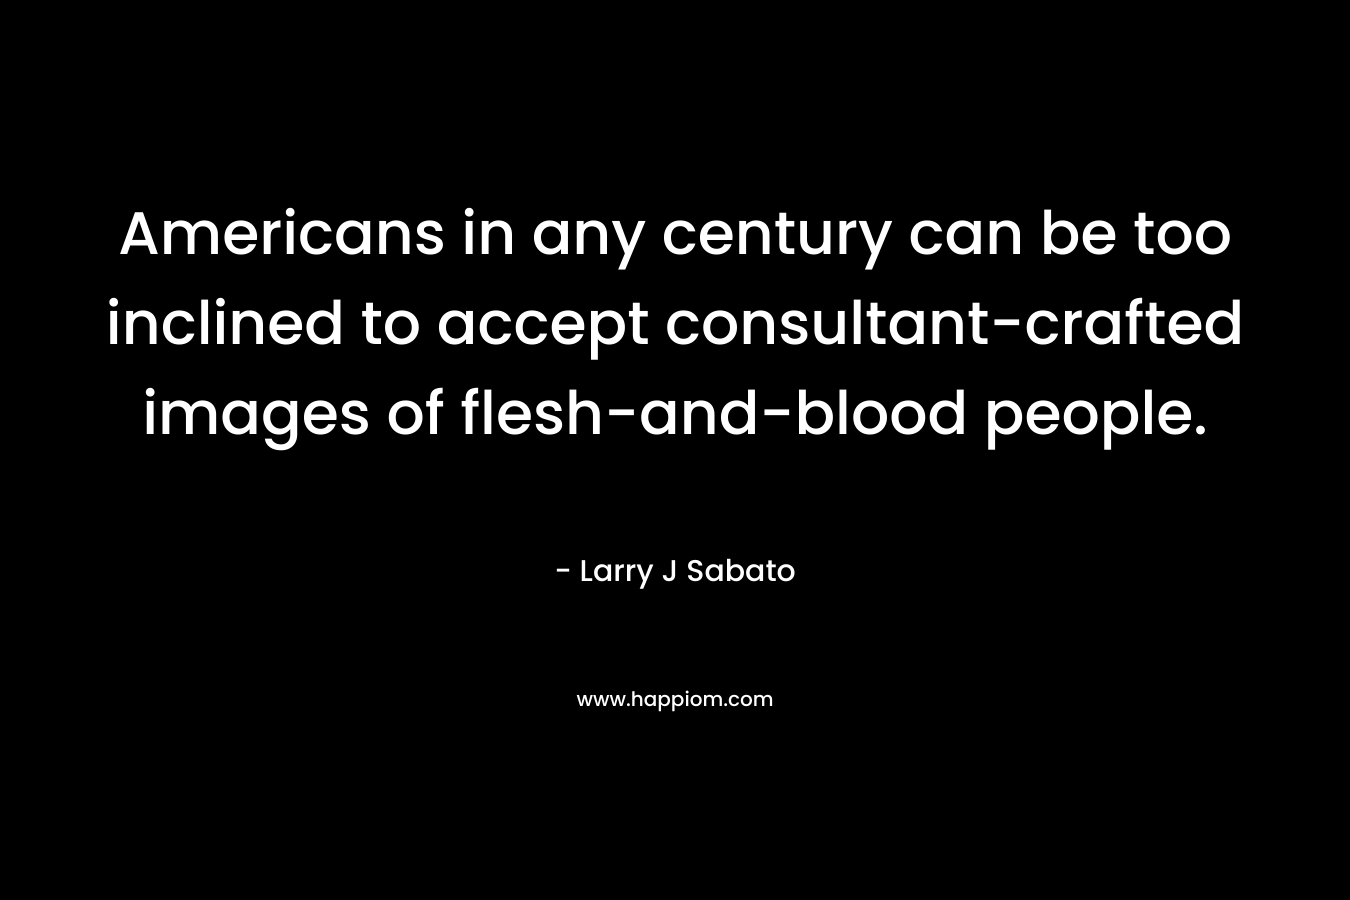 Americans in any century can be too inclined to accept consultant-crafted images of flesh-and-blood people.